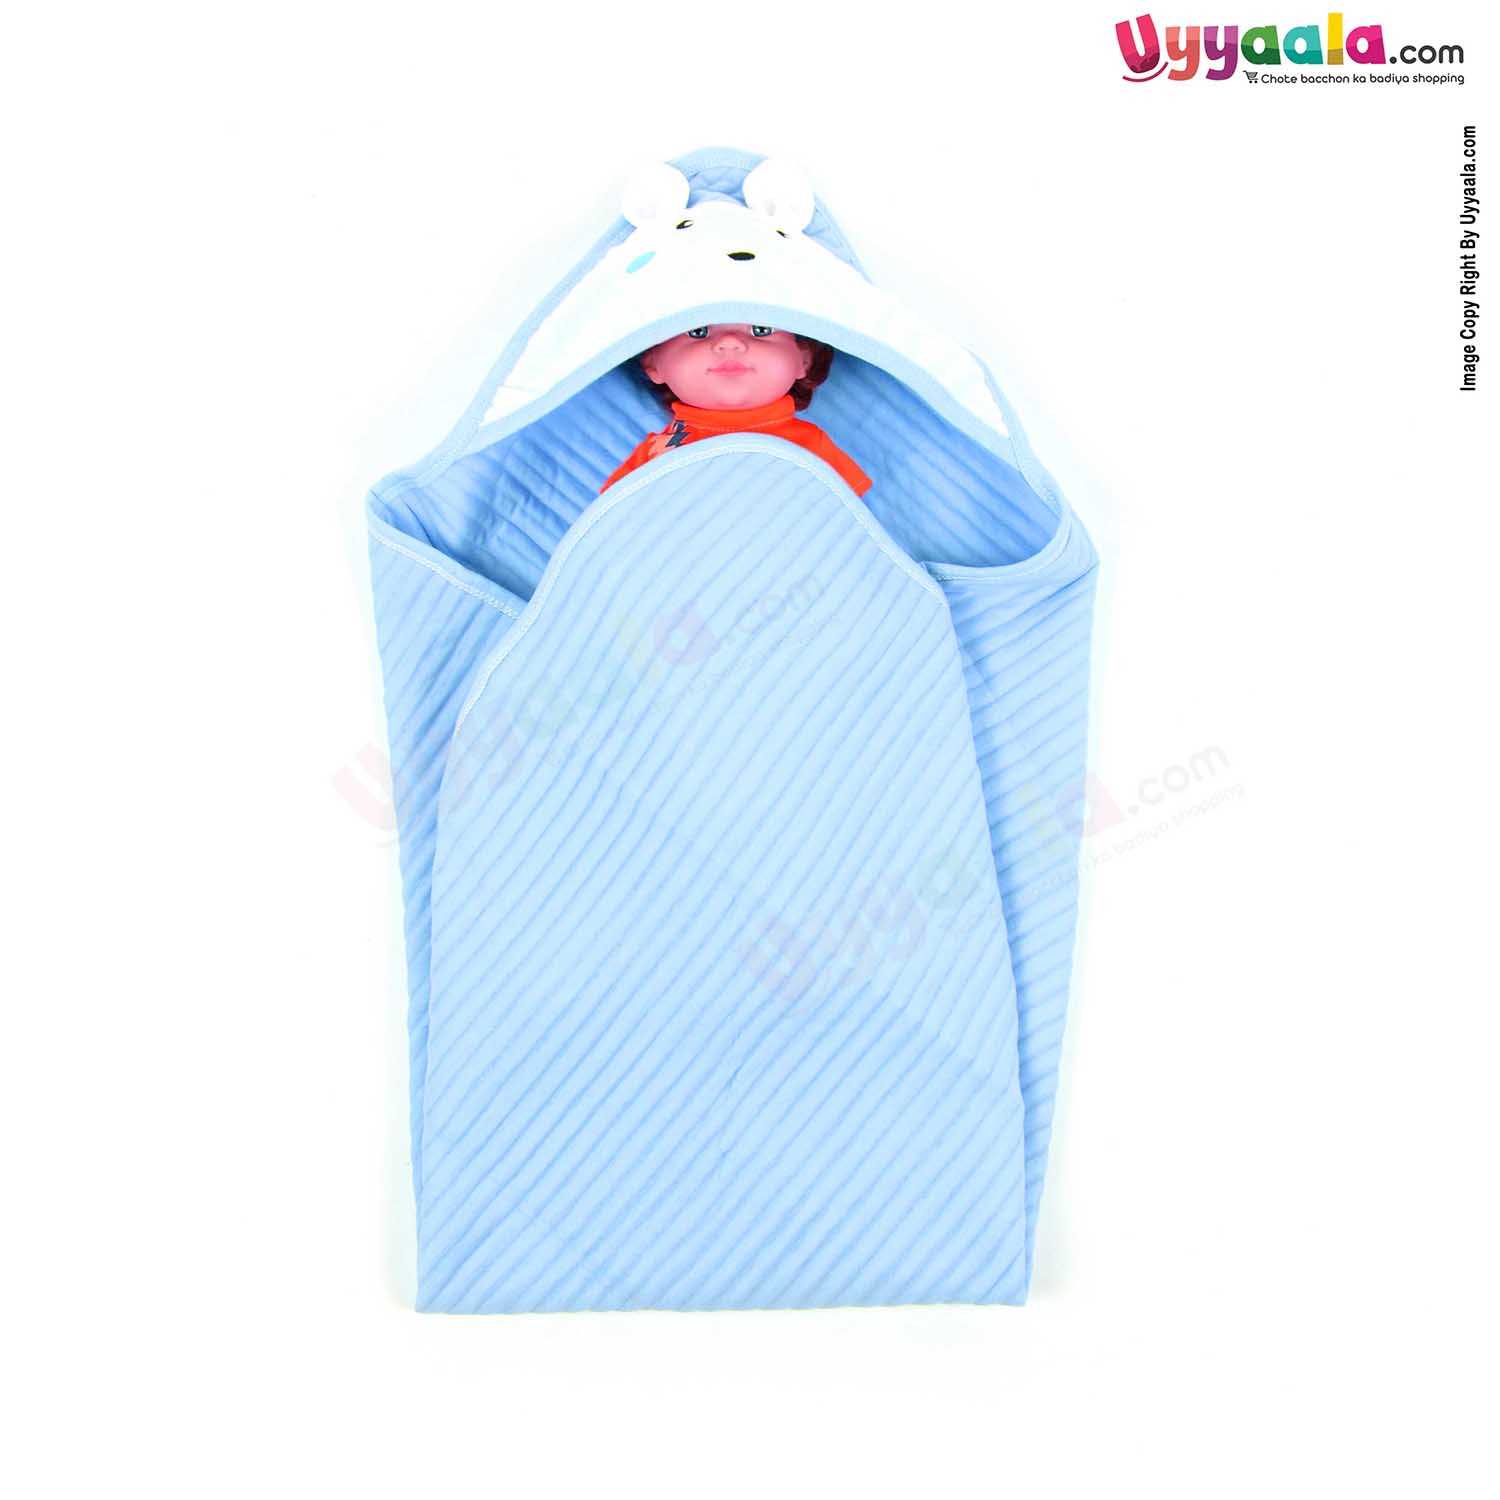 Thermal Hood Blanket Rabbit Character 0-24m Age,Blue